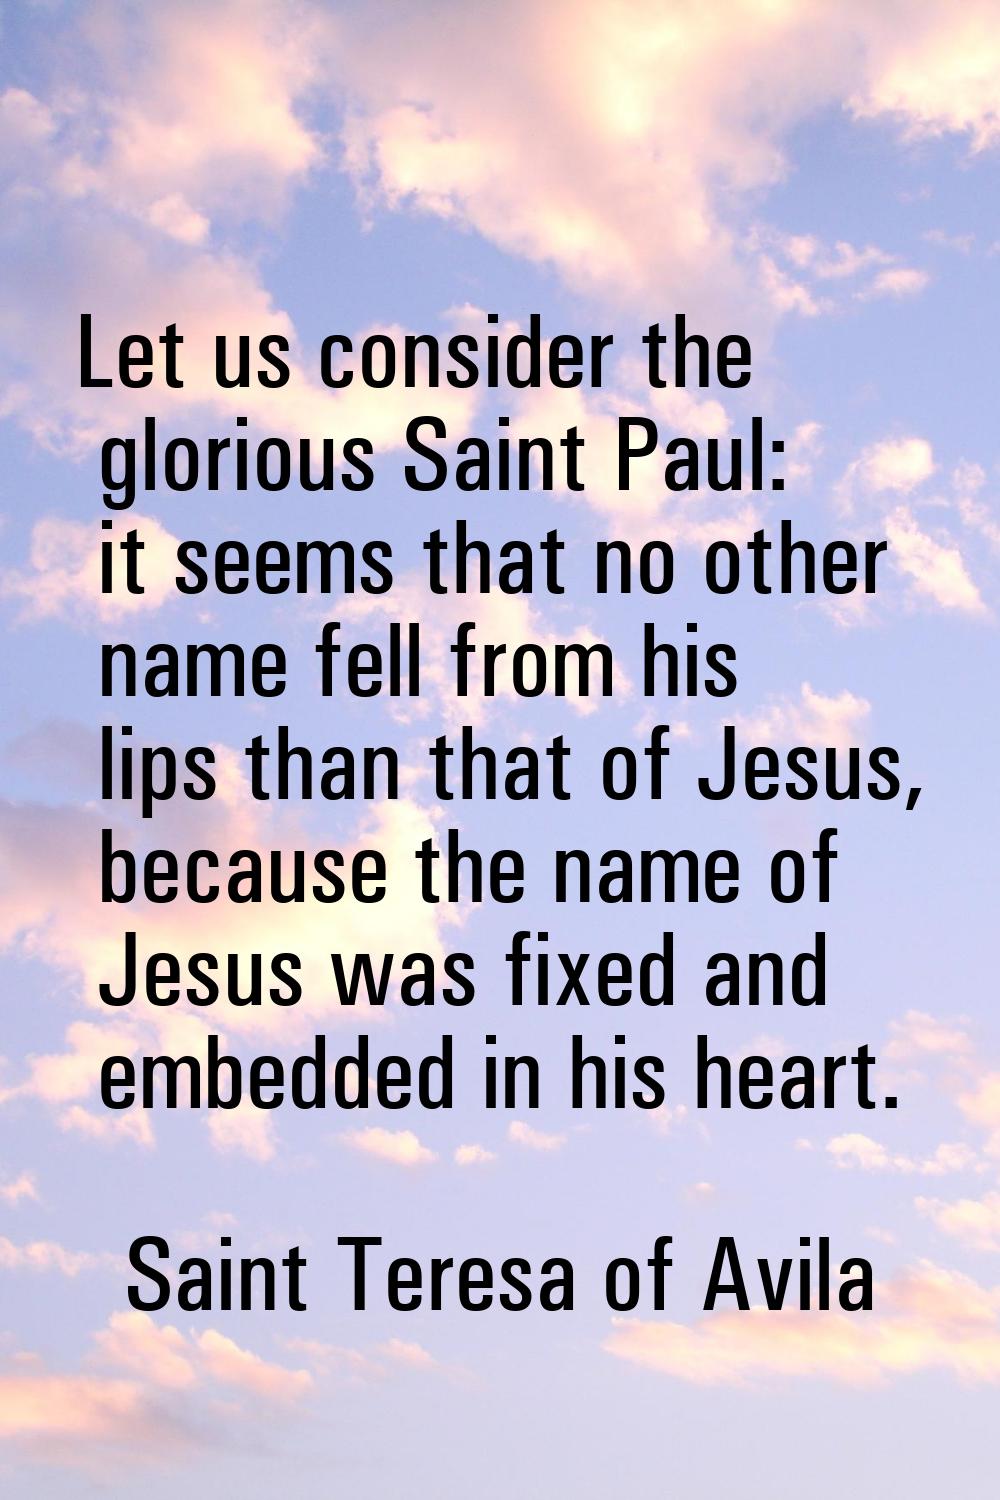 Let us consider the glorious Saint Paul: it seems that no other name fell from his lips than that o